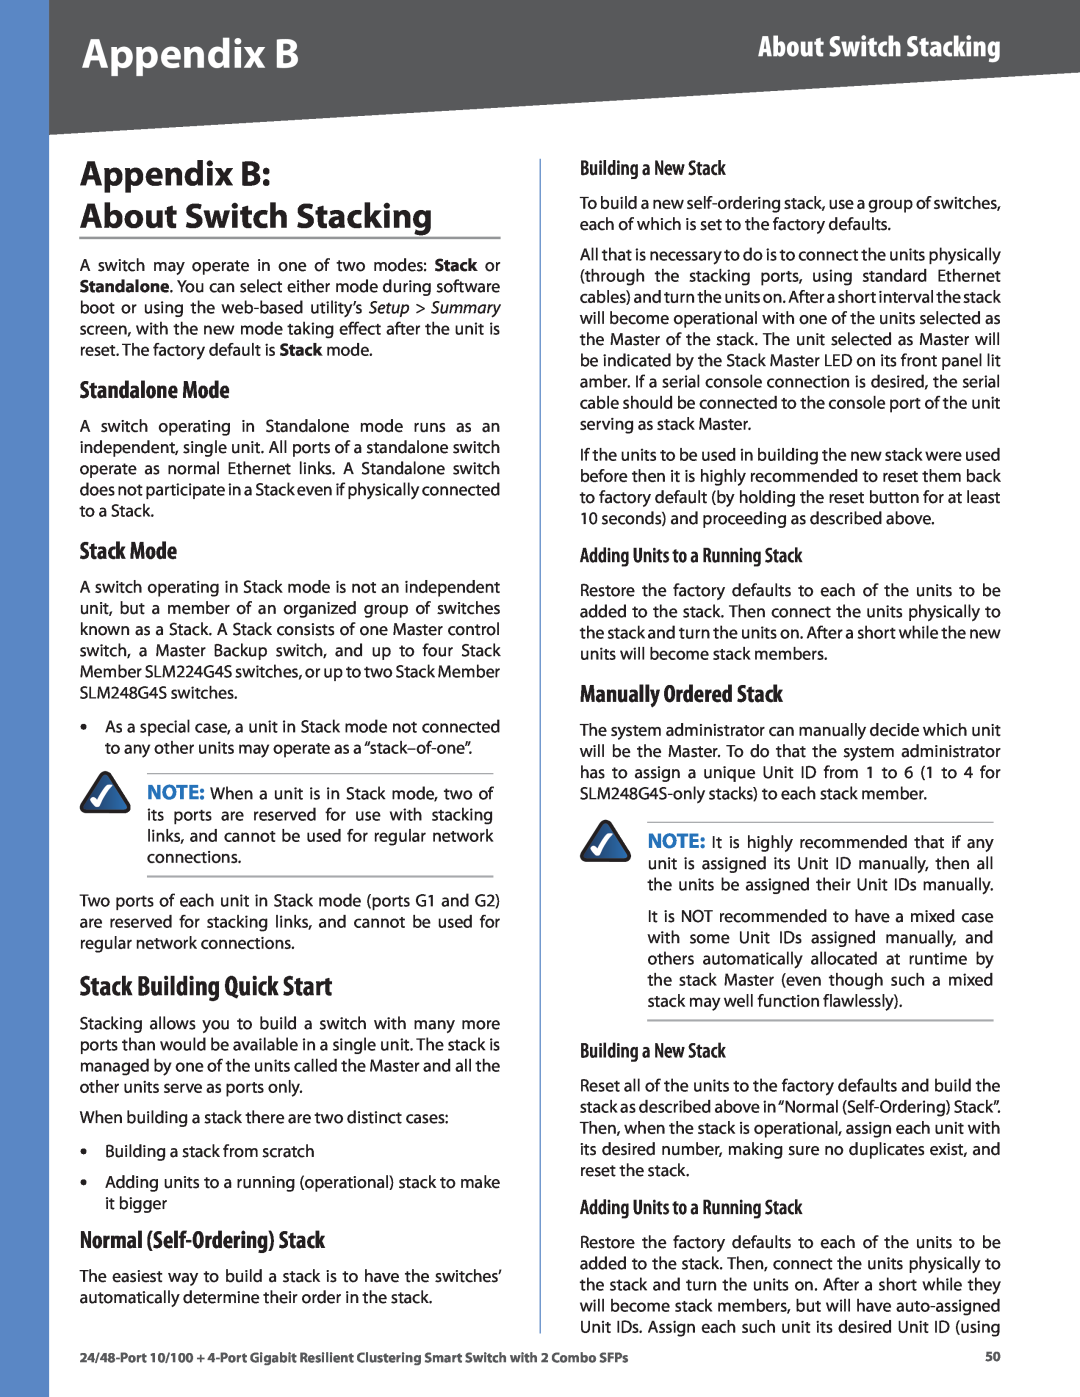 Linksys SLM224G4S manual Appendix B About Switch Stacking, Stack Building Quick Start, Standalone Mode, Stack Mode 